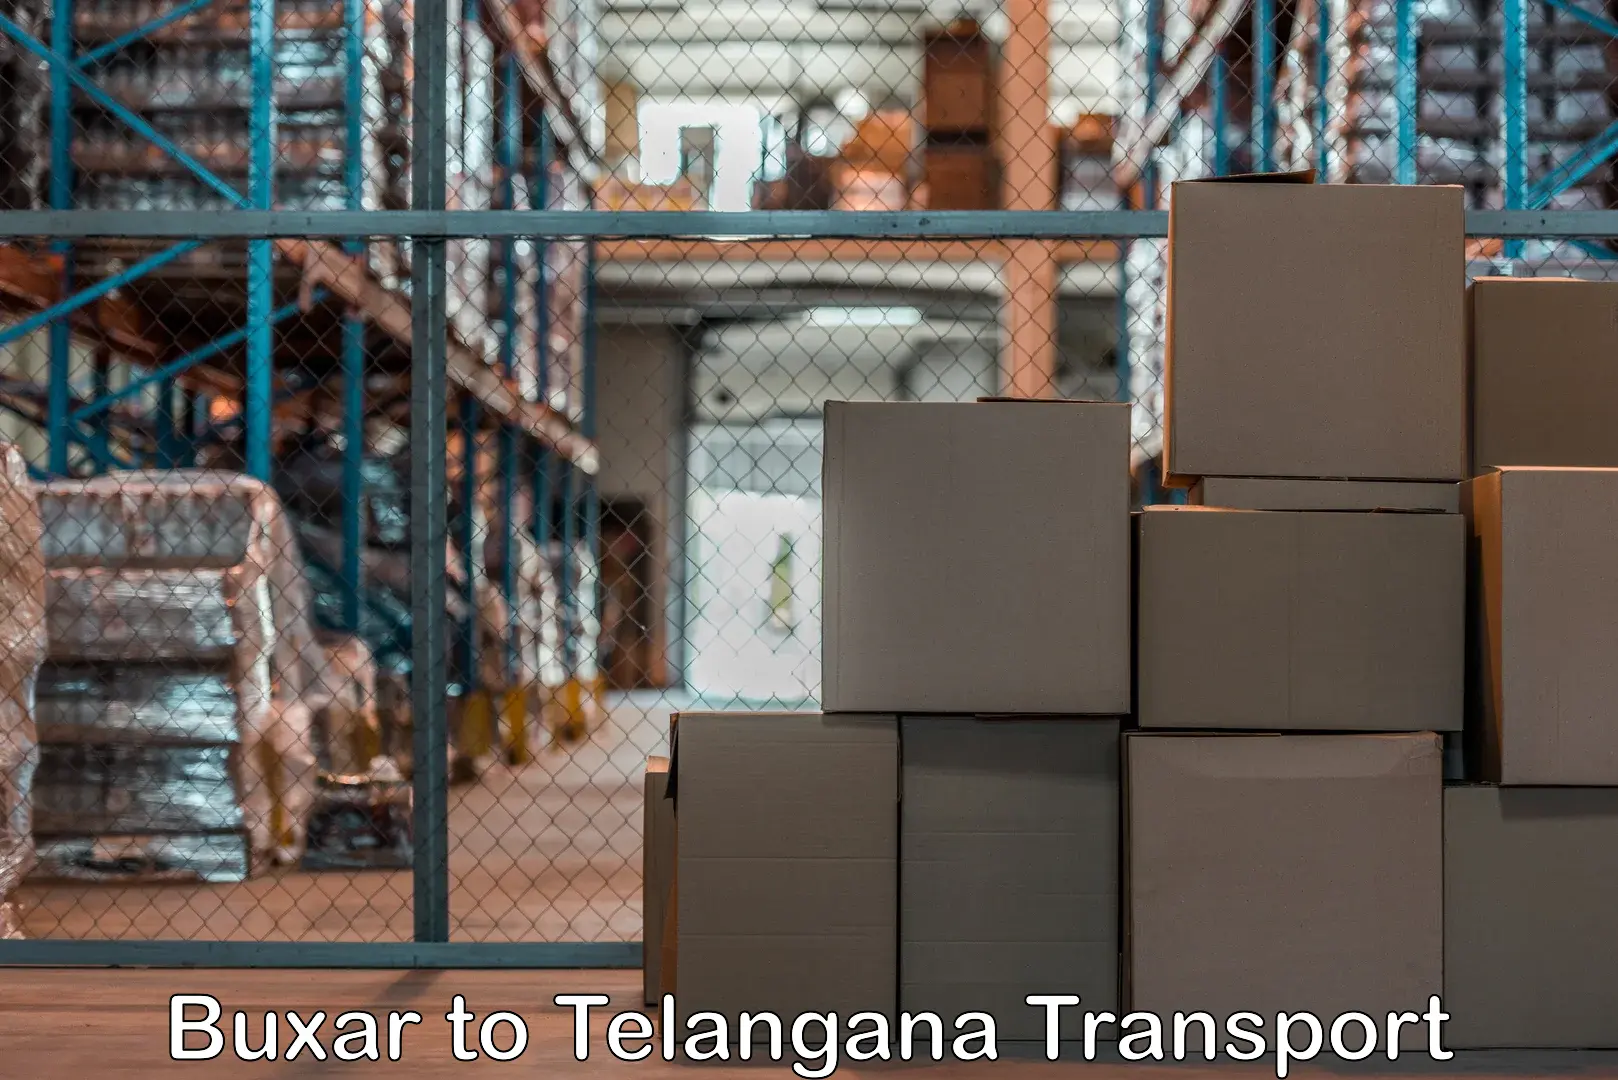 Domestic goods transportation services Buxar to Sultanabad